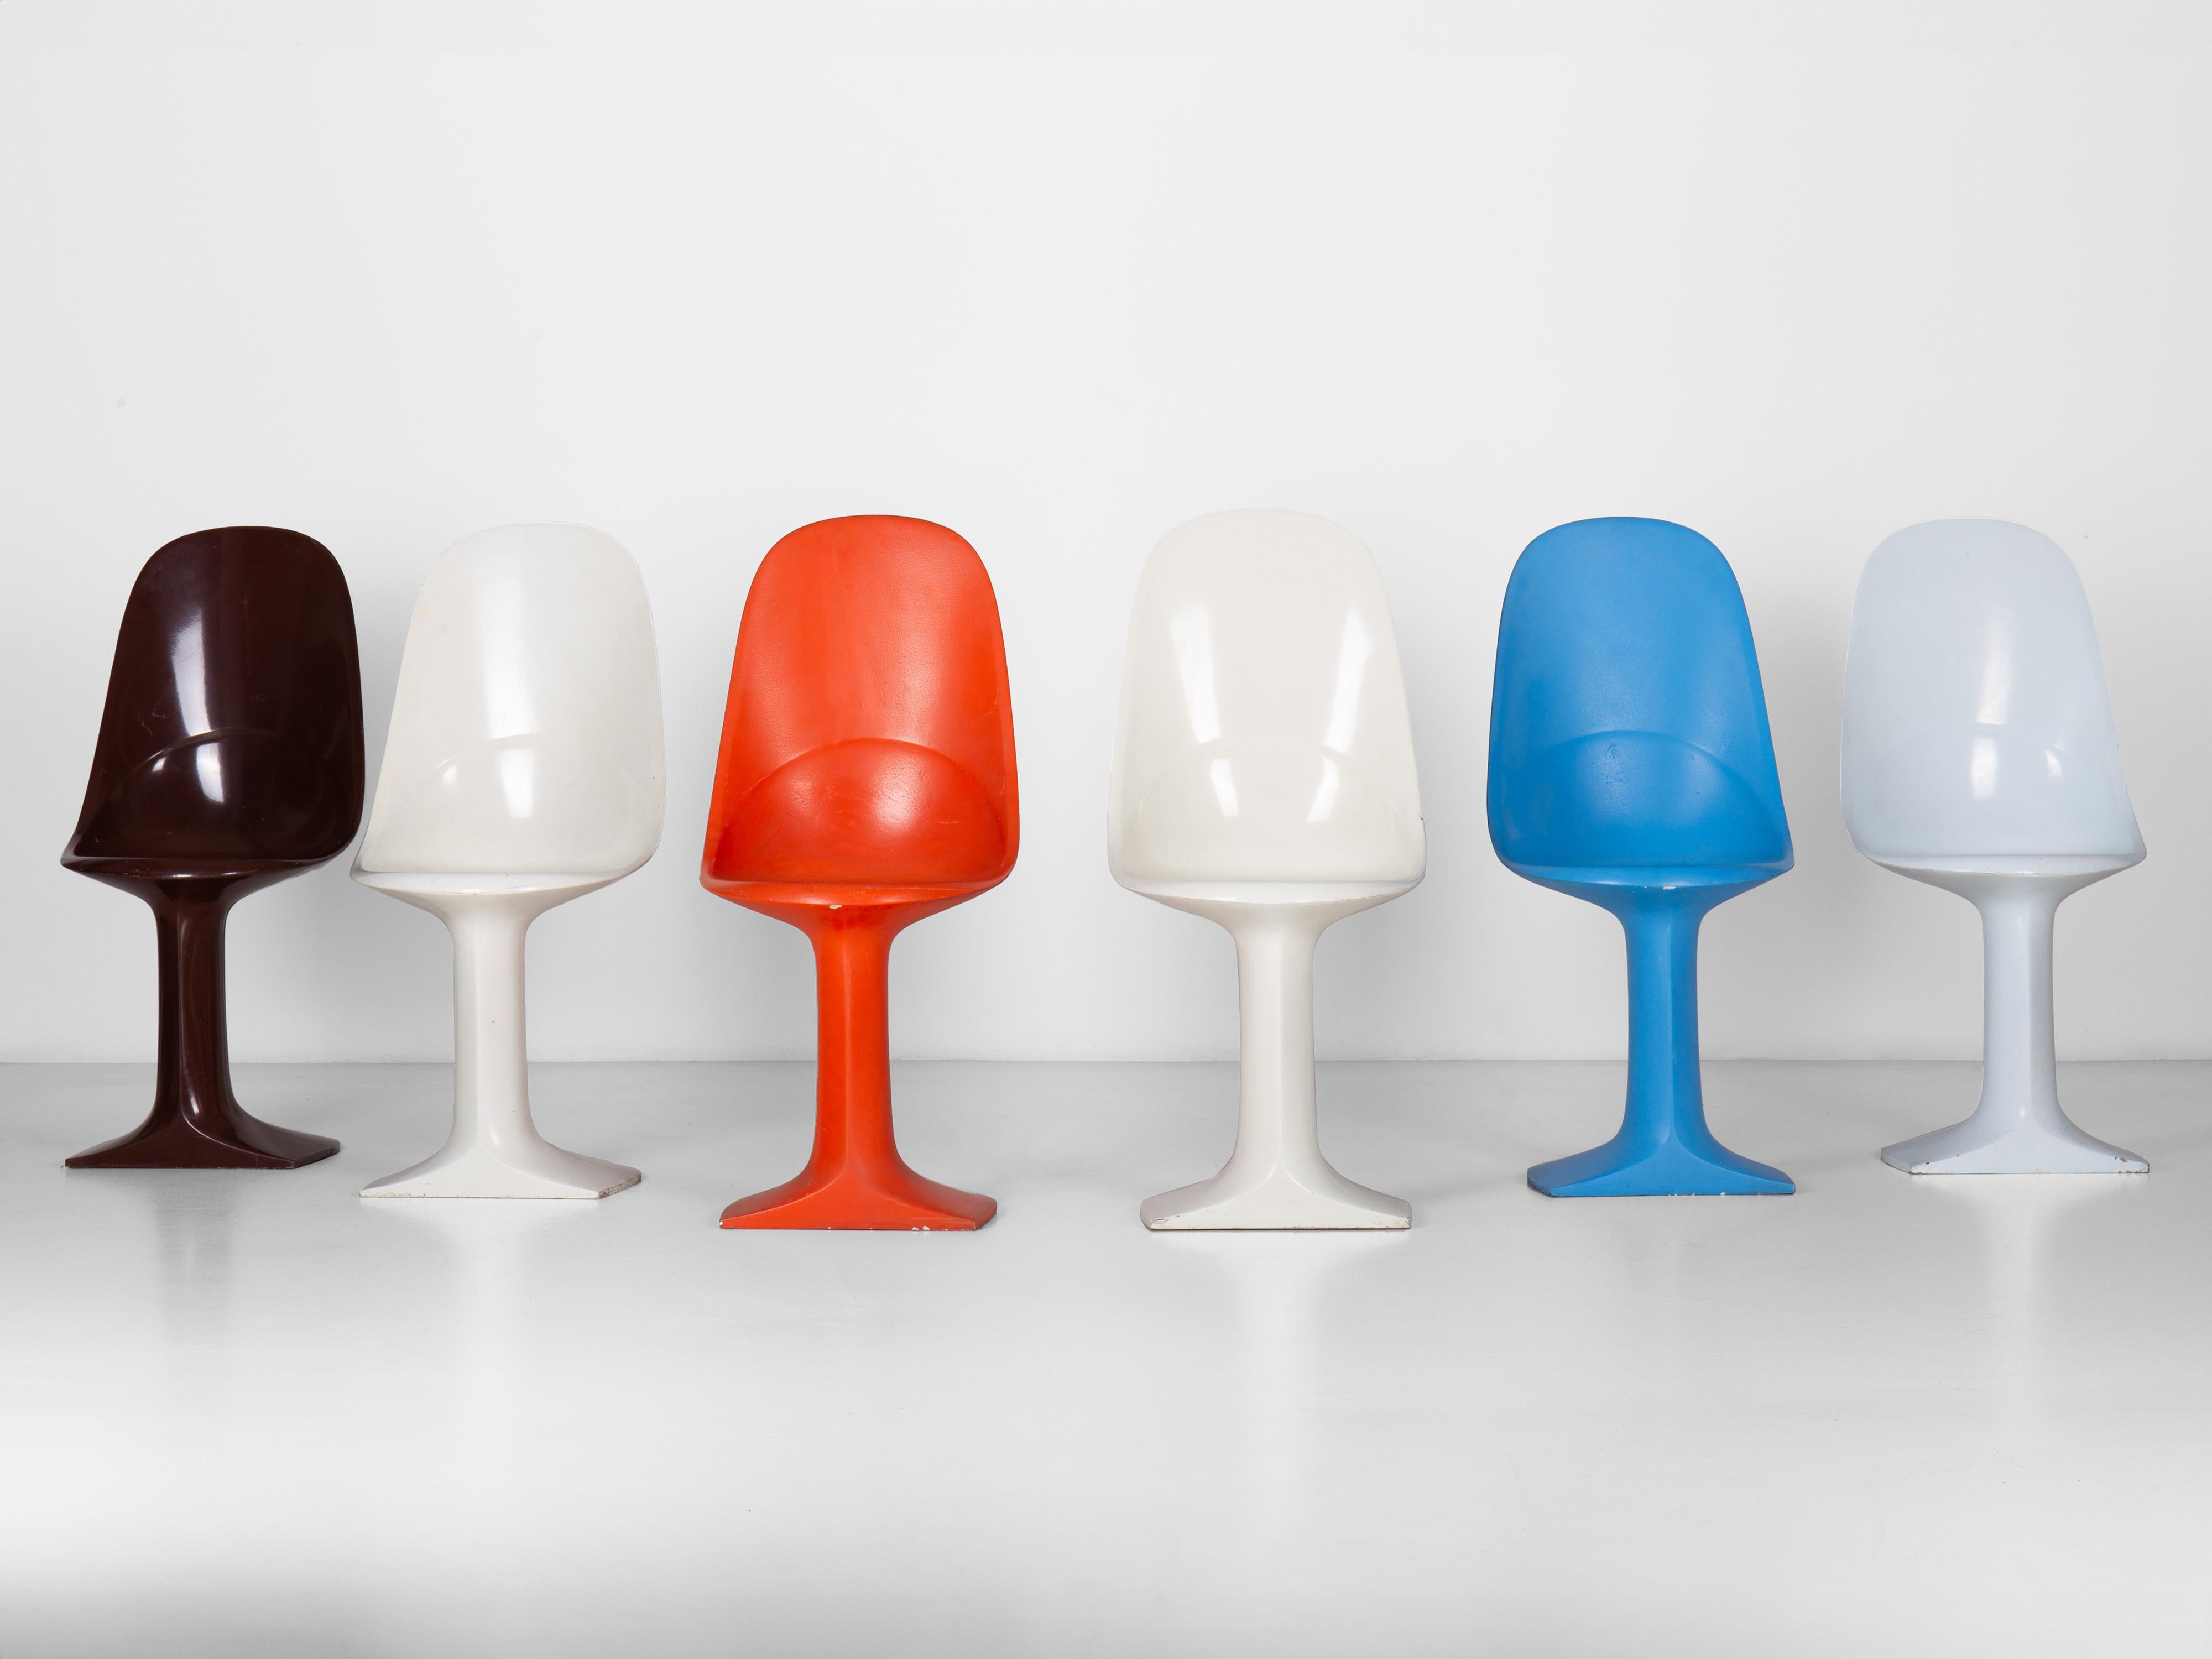 Set of 6 Foemina chairs designed by Augusto Betti.

The Foemina chair is Betti’s first design object.

“These chairs were made to give my students an example of how new shapes can be created by following the possibilities suggested by new materials.